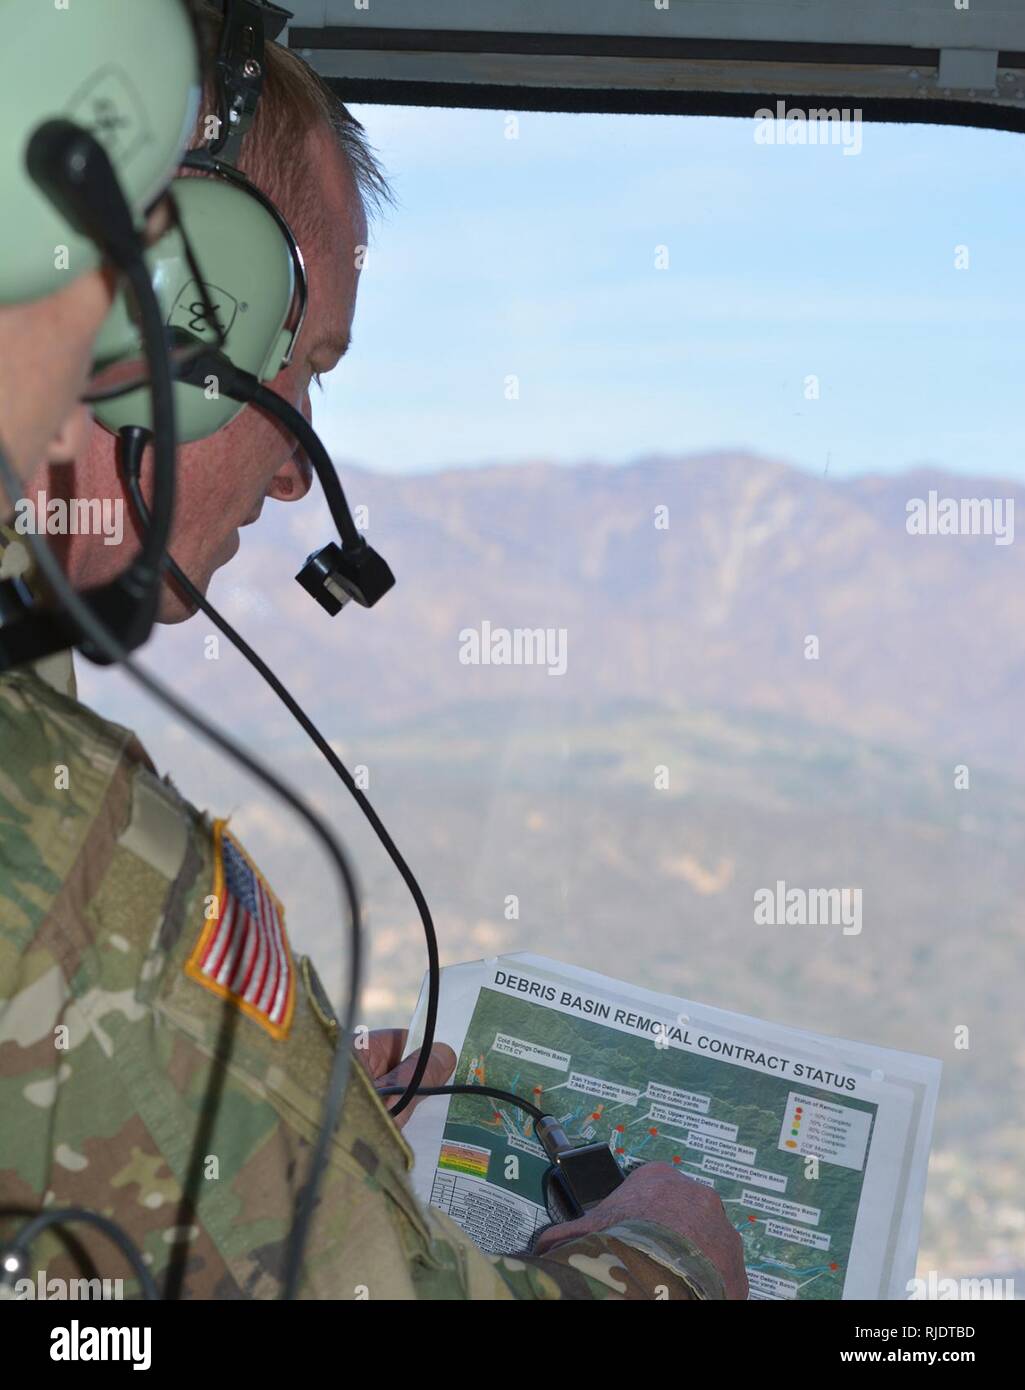 Col. Kirk Gibbs, U.S. Army Corps of Engineers Los Angeles District commander, views a map of the Santa Barbara basins while flying over the area Jan. 18 in a UH-60 Blackhawk helicopter. The Corps completed clearing all 11 basins and 11 channels in Santa Barbara County in April, following a devastating mudslide Jan. 9 in Montecito that took the lives of 23 people. Stock Photo